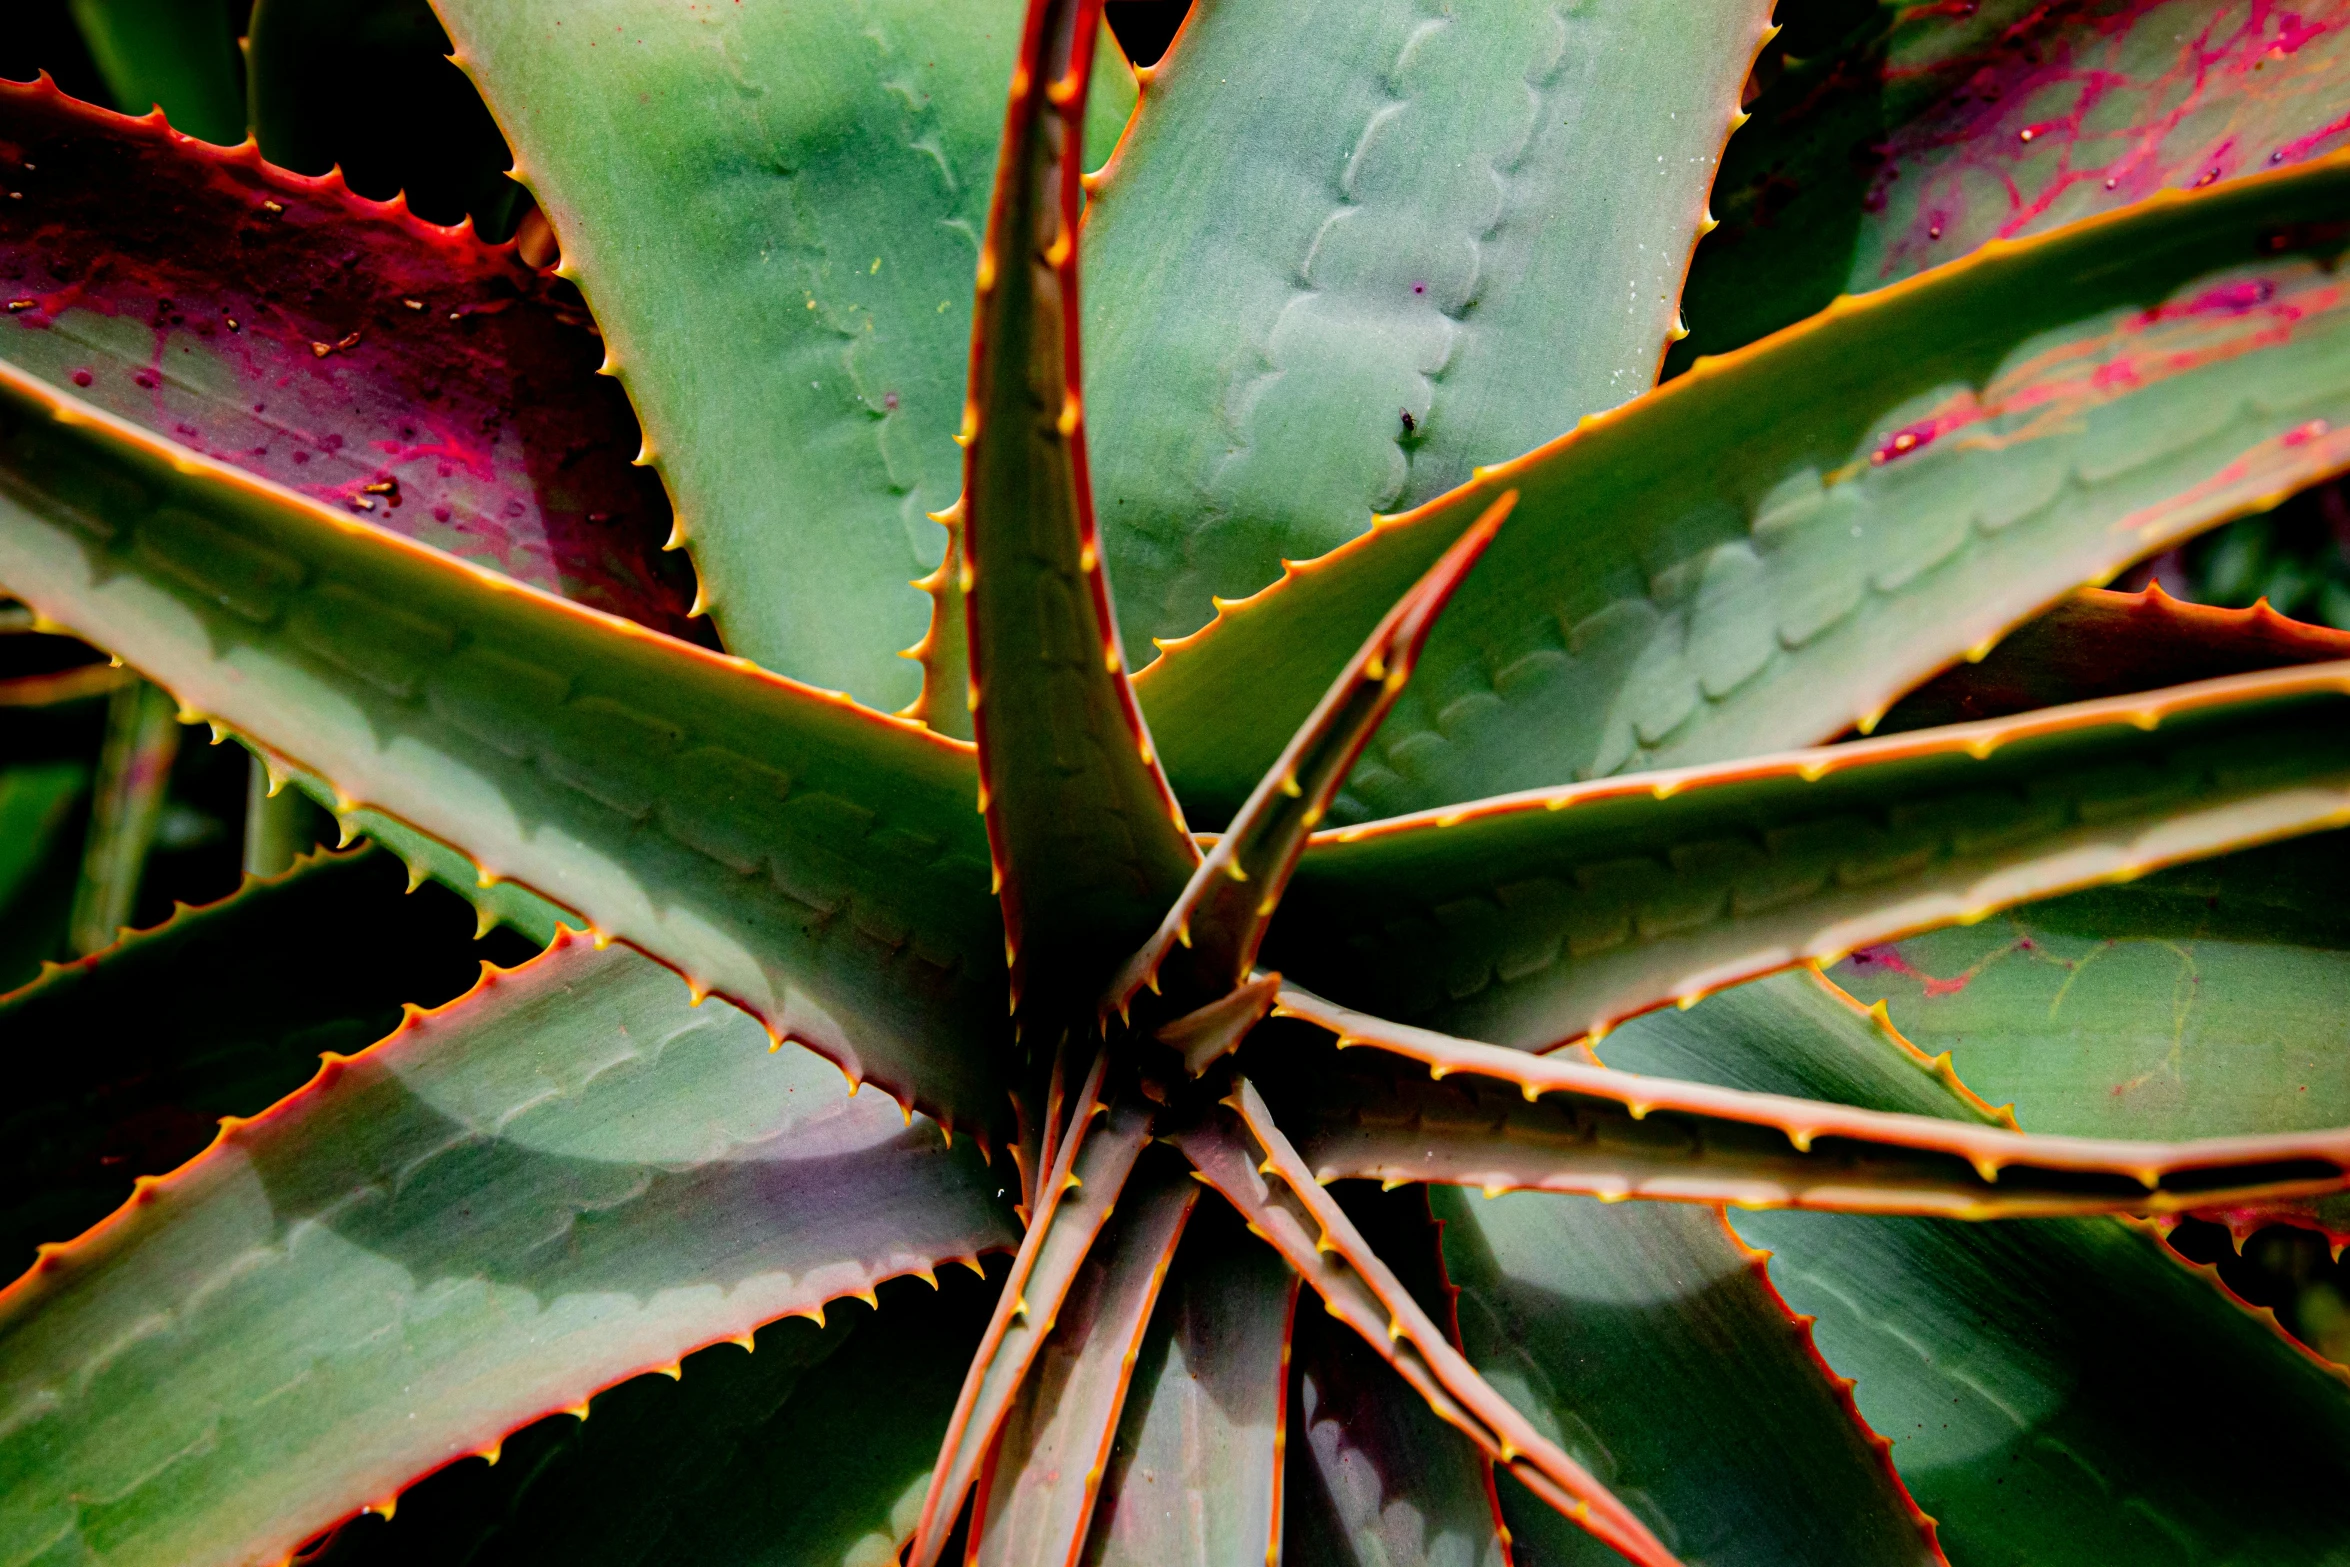 a close up of a plant with red and green leaves, a photo, rows of razor sharp teeth, avatar image, square, huge spines